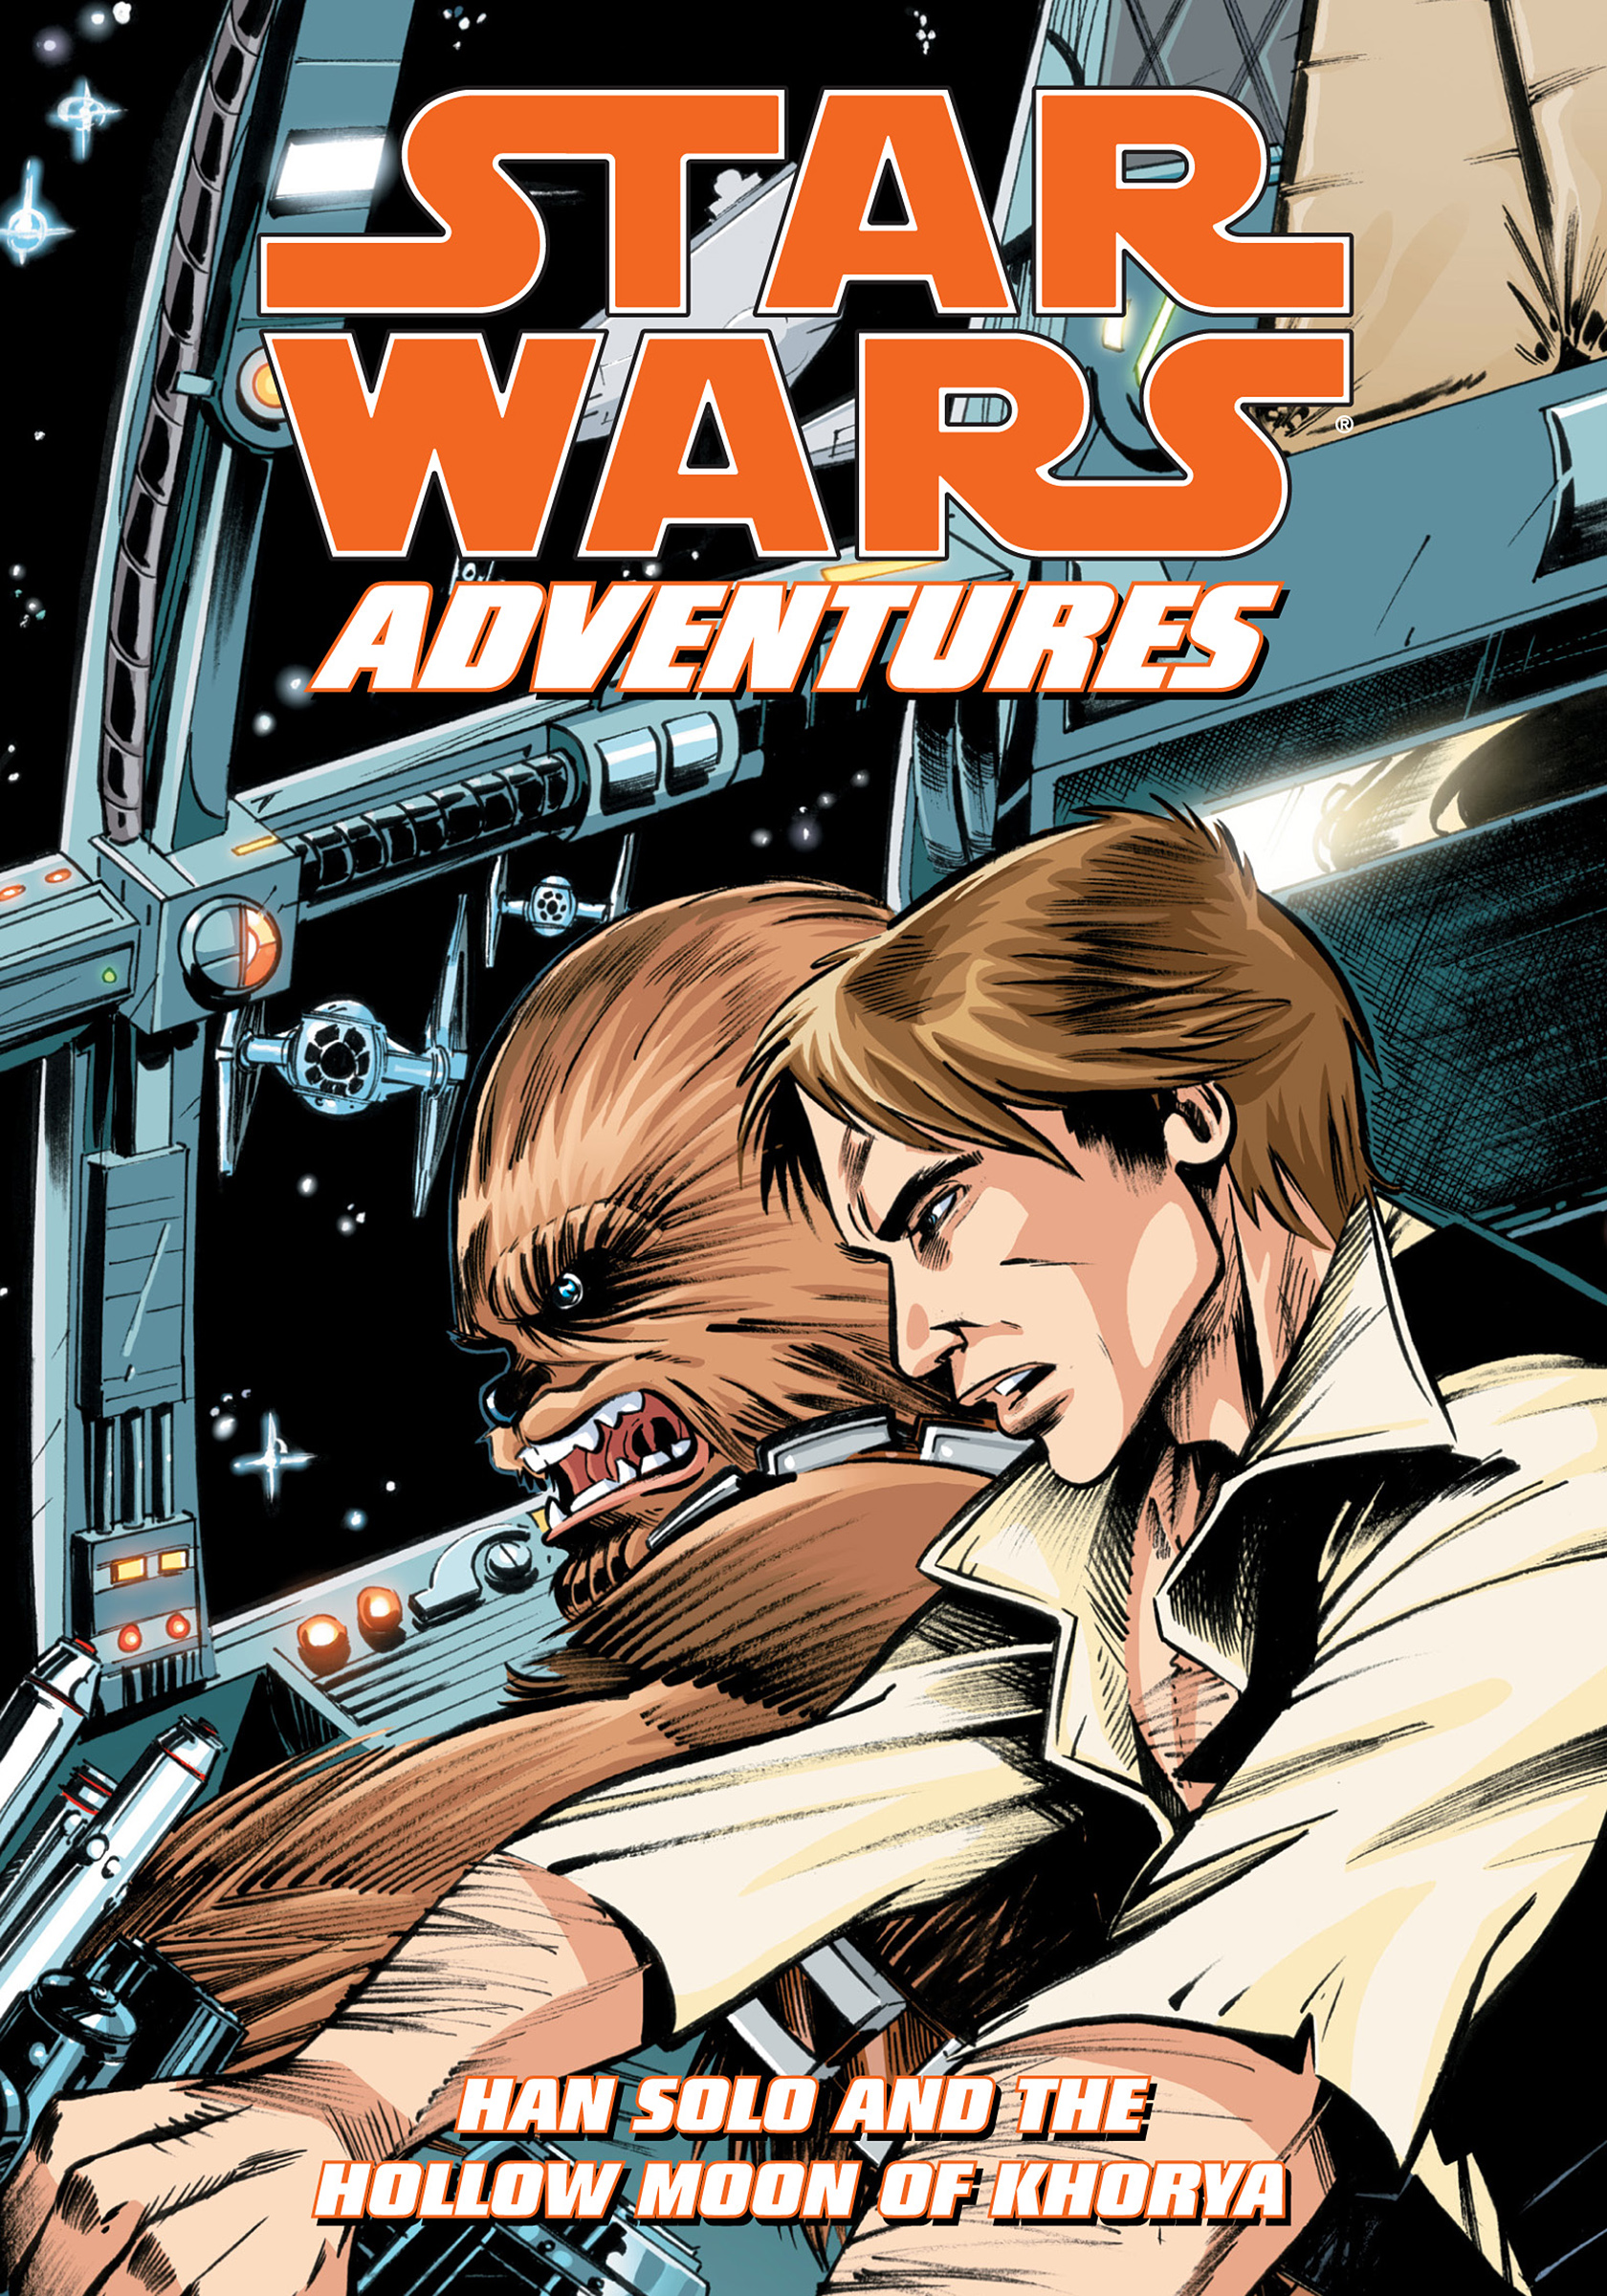 Read online Star Wars Adventures comic -  Issue # Issue Han Solo and the Hollow Moon of Khorya - 1